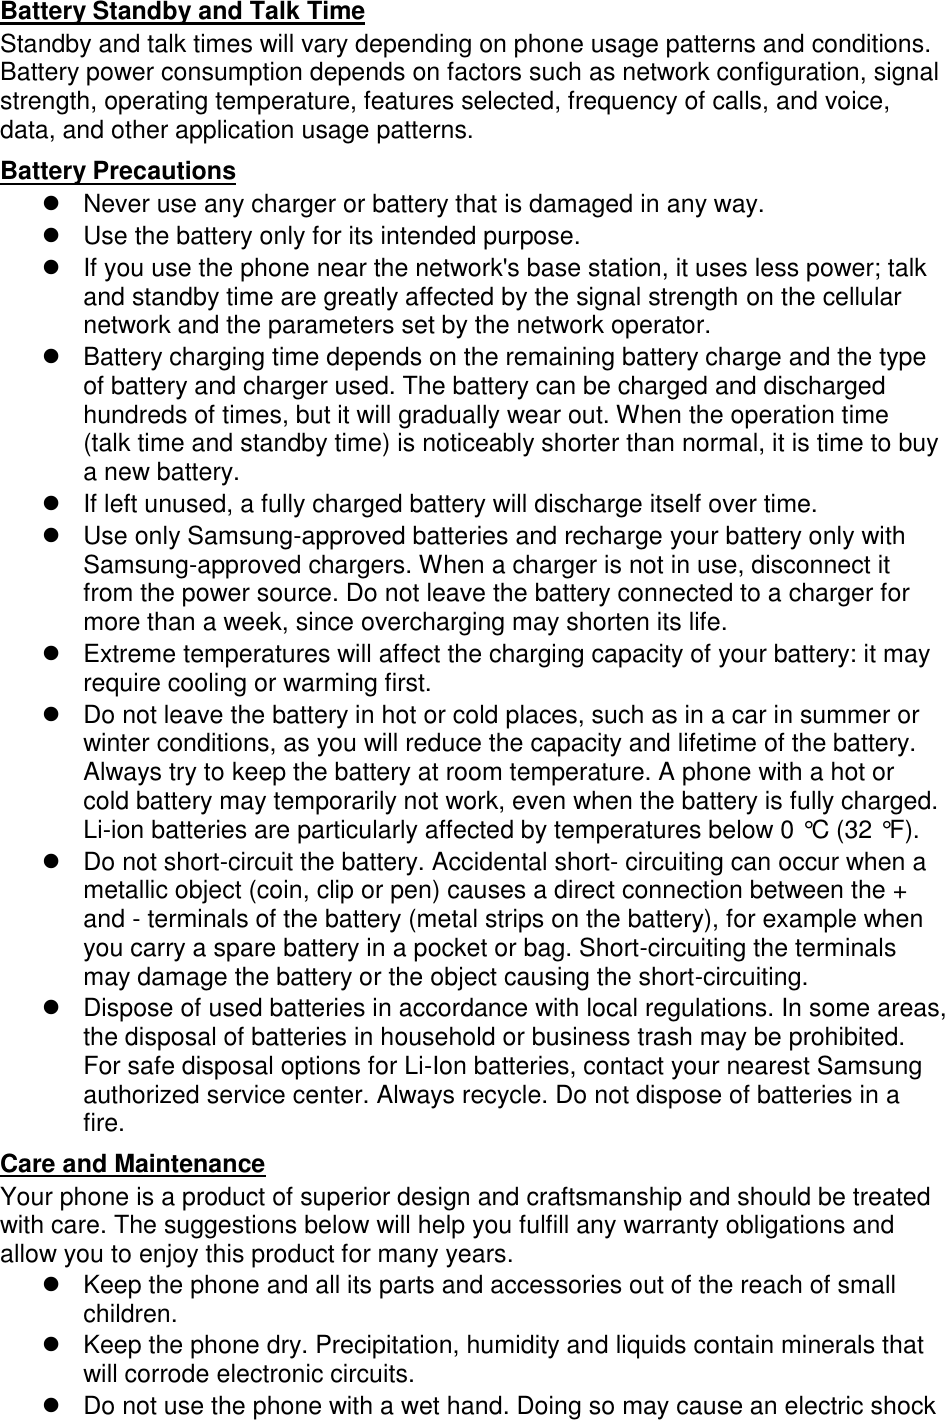 Battery Standby and Talk Time Standby and talk times will vary depending on phone usage patterns and conditions. Battery power consumption depends on factors such as network configuration, signal strength, operating temperature, features selected, frequency of calls, and voice, data, and other application usage patterns.   Battery Precautions   Never use any charger or battery that is damaged in any way.   Use the battery only for its intended purpose.   If you use the phone near the network&apos;s base station, it uses less power; talk and standby time are greatly affected by the signal strength on the cellular network and the parameters set by the network operator.   Battery charging time depends on the remaining battery charge and the type of battery and charger used. The battery can be charged and discharged hundreds of times, but it will gradually wear out. When the operation time (talk time and standby time) is noticeably shorter than normal, it is time to buy a new battery.   If left unused, a fully charged battery will discharge itself over time.   Use only Samsung-approved batteries and recharge your battery only with Samsung-approved chargers. When a charger is not in use, disconnect it from the power source. Do not leave the battery connected to a charger for more than a week, since overcharging may shorten its life.   Extreme temperatures will affect the charging capacity of your battery: it may require cooling or warming first.   Do not leave the battery in hot or cold places, such as in a car in summer or winter conditions, as you will reduce the capacity and lifetime of the battery. Always try to keep the battery at room temperature. A phone with a hot or cold battery may temporarily not work, even when the battery is fully charged. Li-ion batteries are particularly affected by temperatures below 0 °C (32 °F).   Do not short-circuit the battery. Accidental short- circuiting can occur when a metallic object (coin, clip or pen) causes a direct connection between the + and - terminals of the battery (metal strips on the battery), for example when you carry a spare battery in a pocket or bag. Short-circuiting the terminals may damage the battery or the object causing the short-circuiting.   Dispose of used batteries in accordance with local regulations. In some areas, the disposal of batteries in household or business trash may be prohibited. For safe disposal options for Li-Ion batteries, contact your nearest Samsung authorized service center. Always recycle. Do not dispose of batteries in a fire. Care and Maintenance Your phone is a product of superior design and craftsmanship and should be treated with care. The suggestions below will help you fulfill any warranty obligations and allow you to enjoy this product for many years.   Keep the phone and all its parts and accessories out of the reach of small children.   Keep the phone dry. Precipitation, humidity and liquids contain minerals that will corrode electronic circuits.   Do not use the phone with a wet hand. Doing so may cause an electric shock 